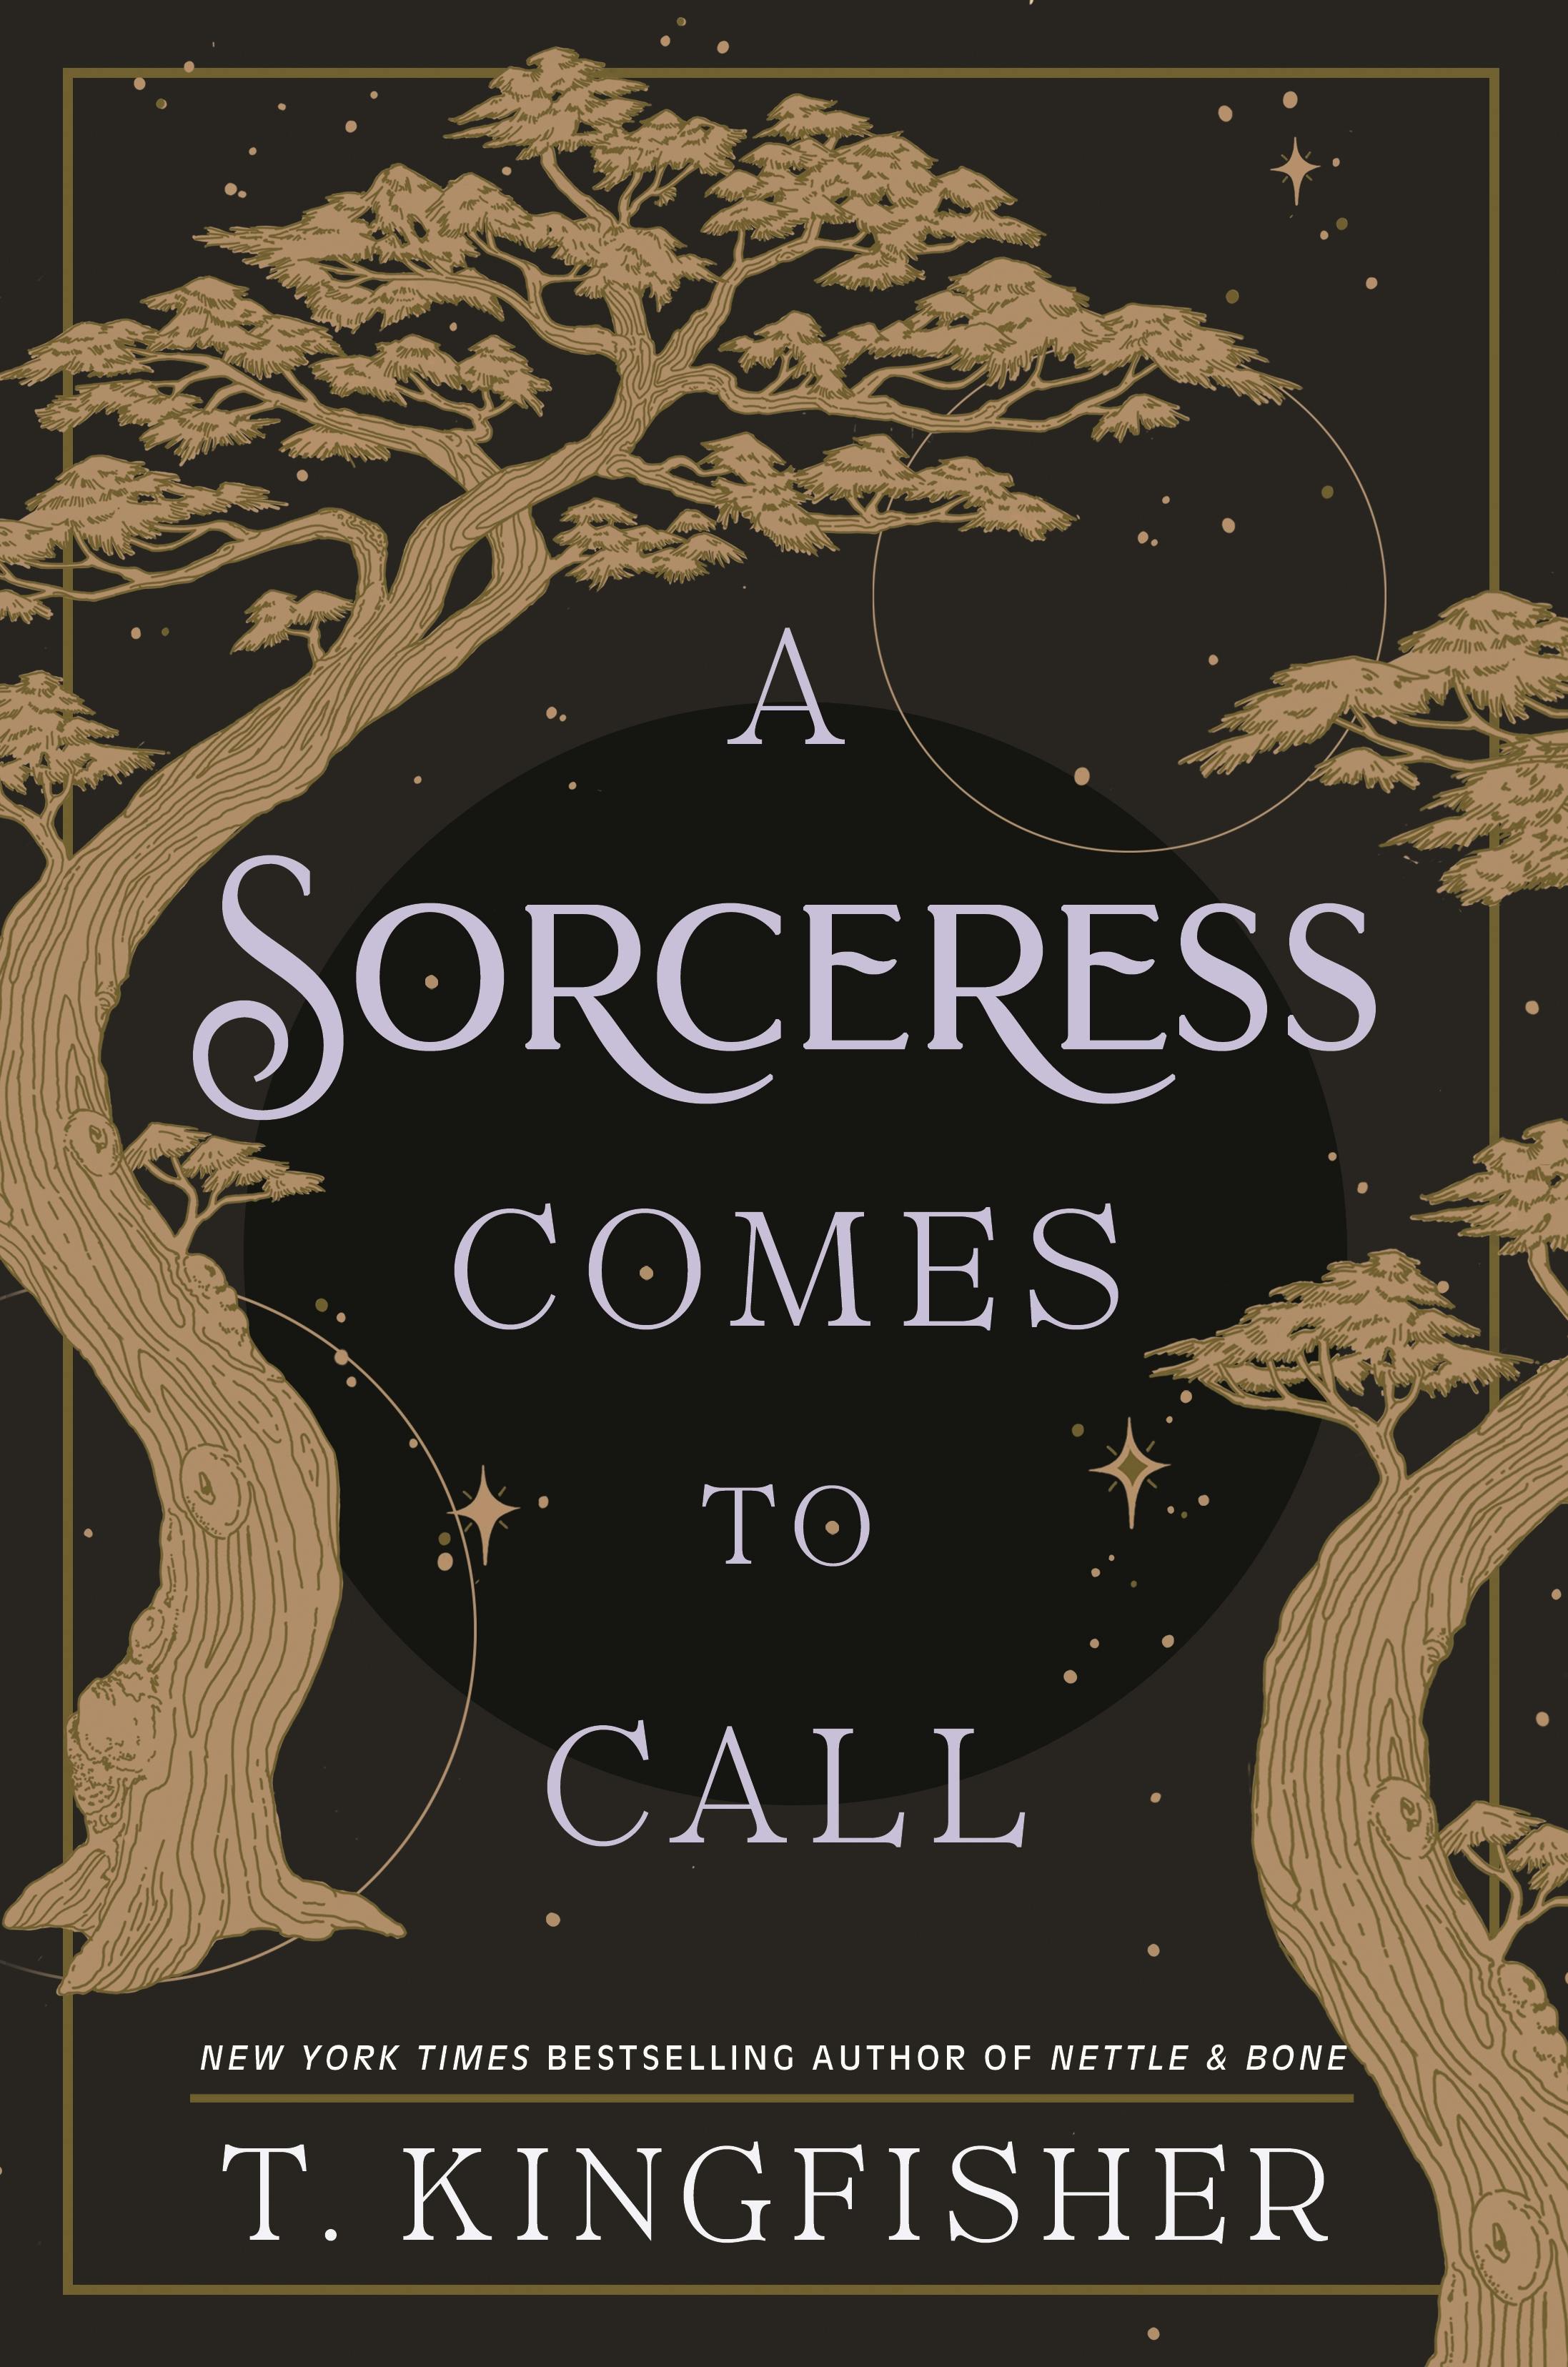 Cover for the book titled as: A Sorceress Comes to Call